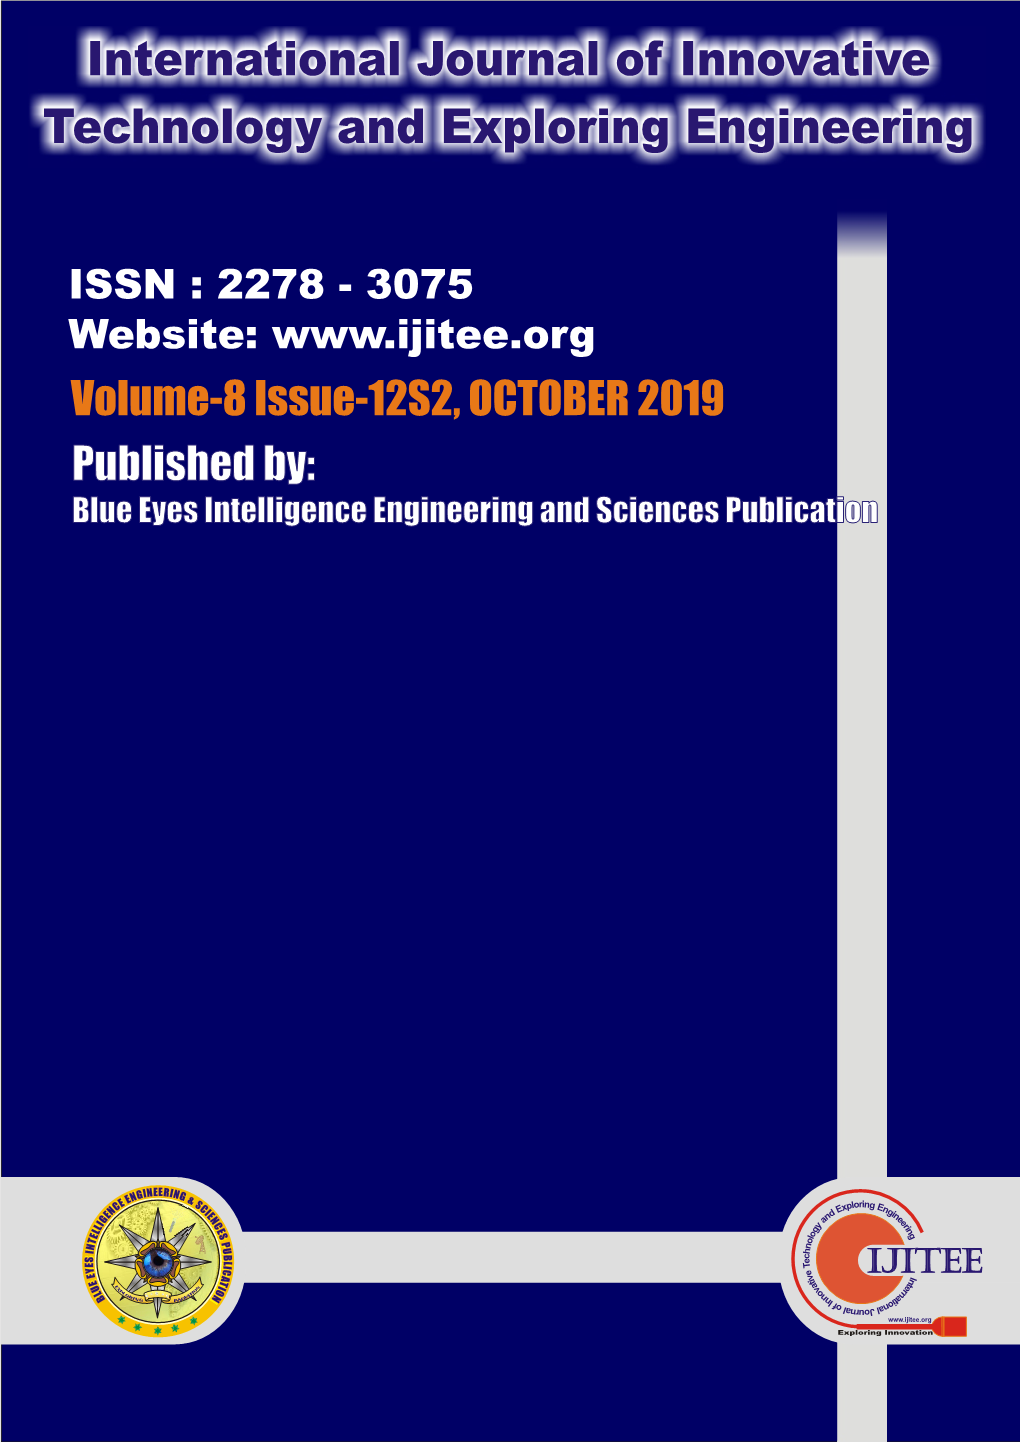 International Journal of Innovative Technology and Exploring Engineering